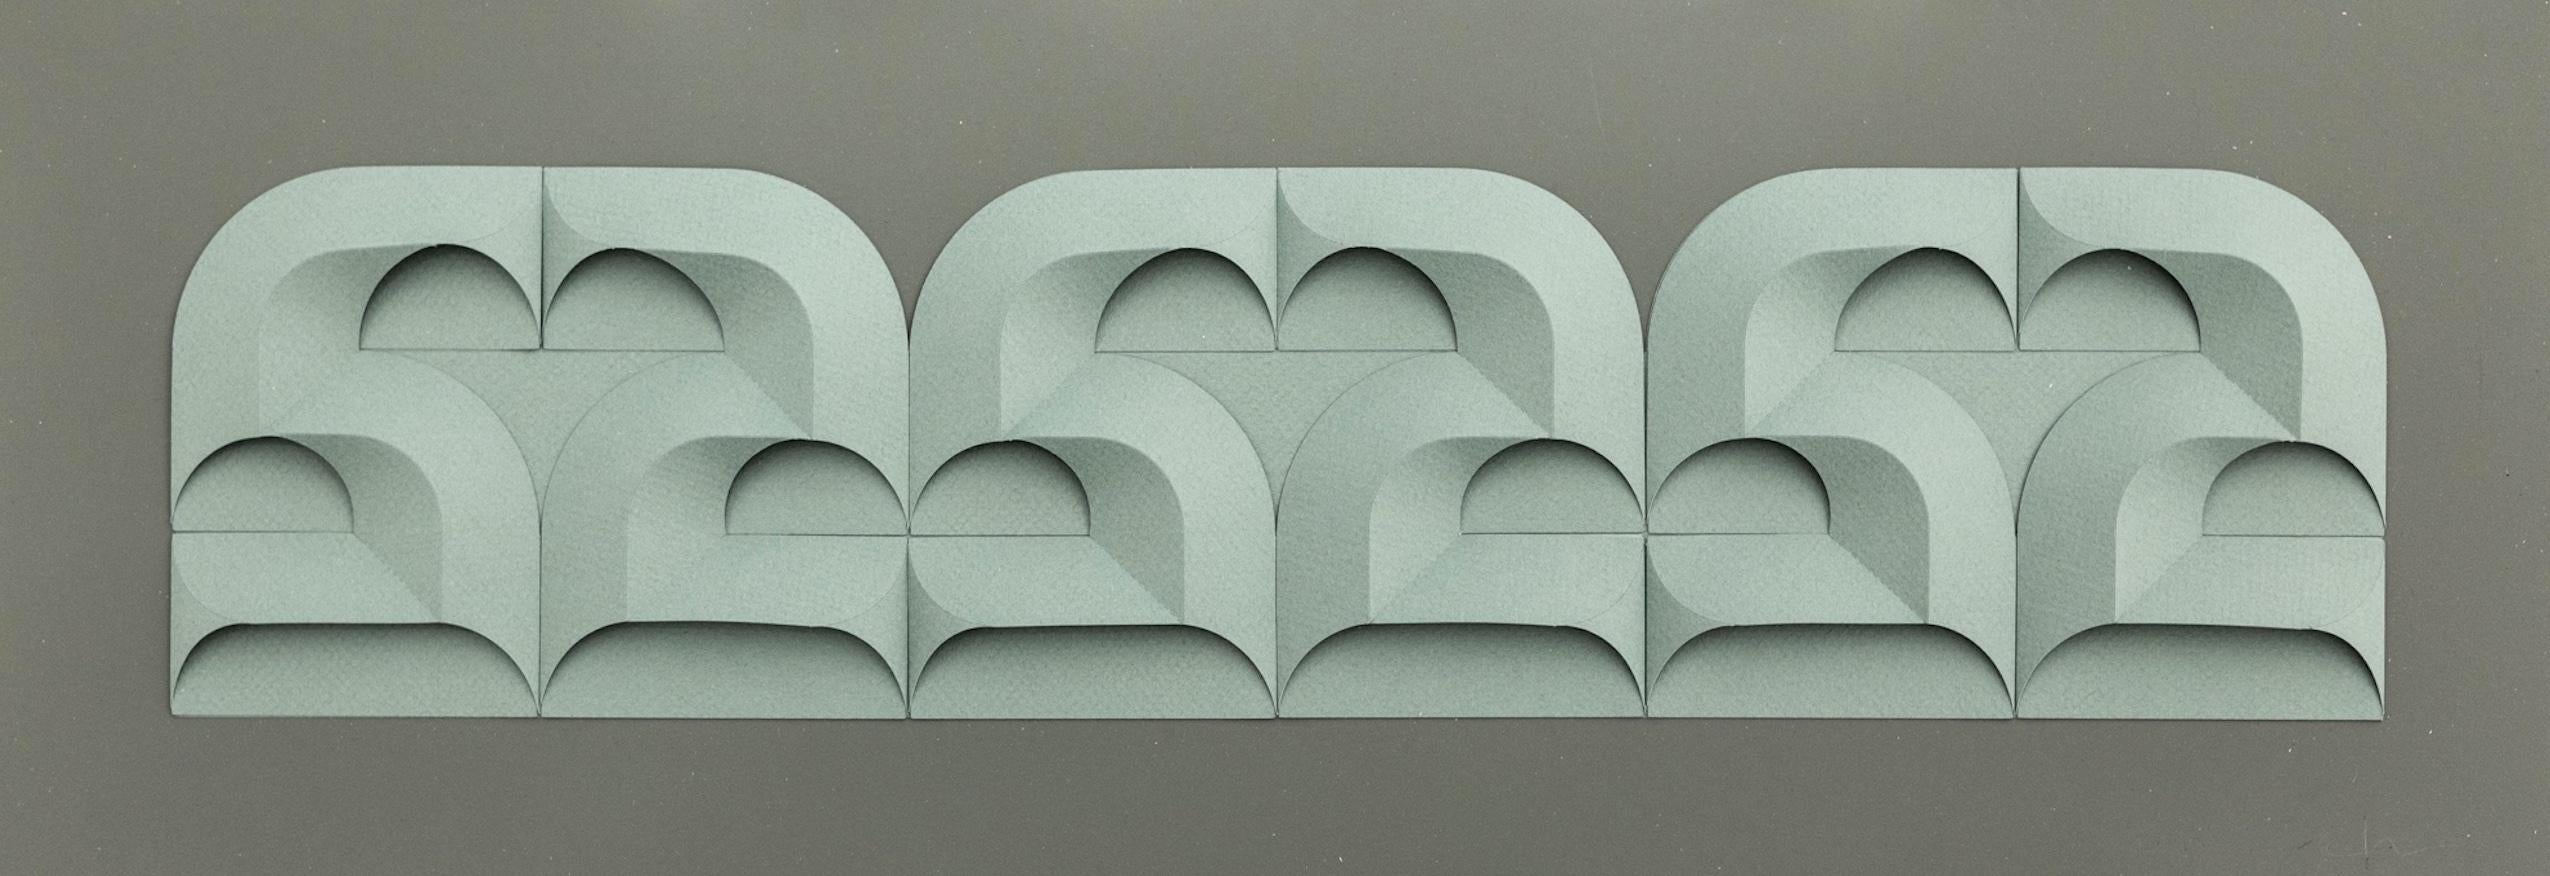 Matt Shlian Abstract Sculpture - "S&S&S&S 17 in Sage Green on Ivy", Hand-Cut Archival Paper, Abstract Patterns